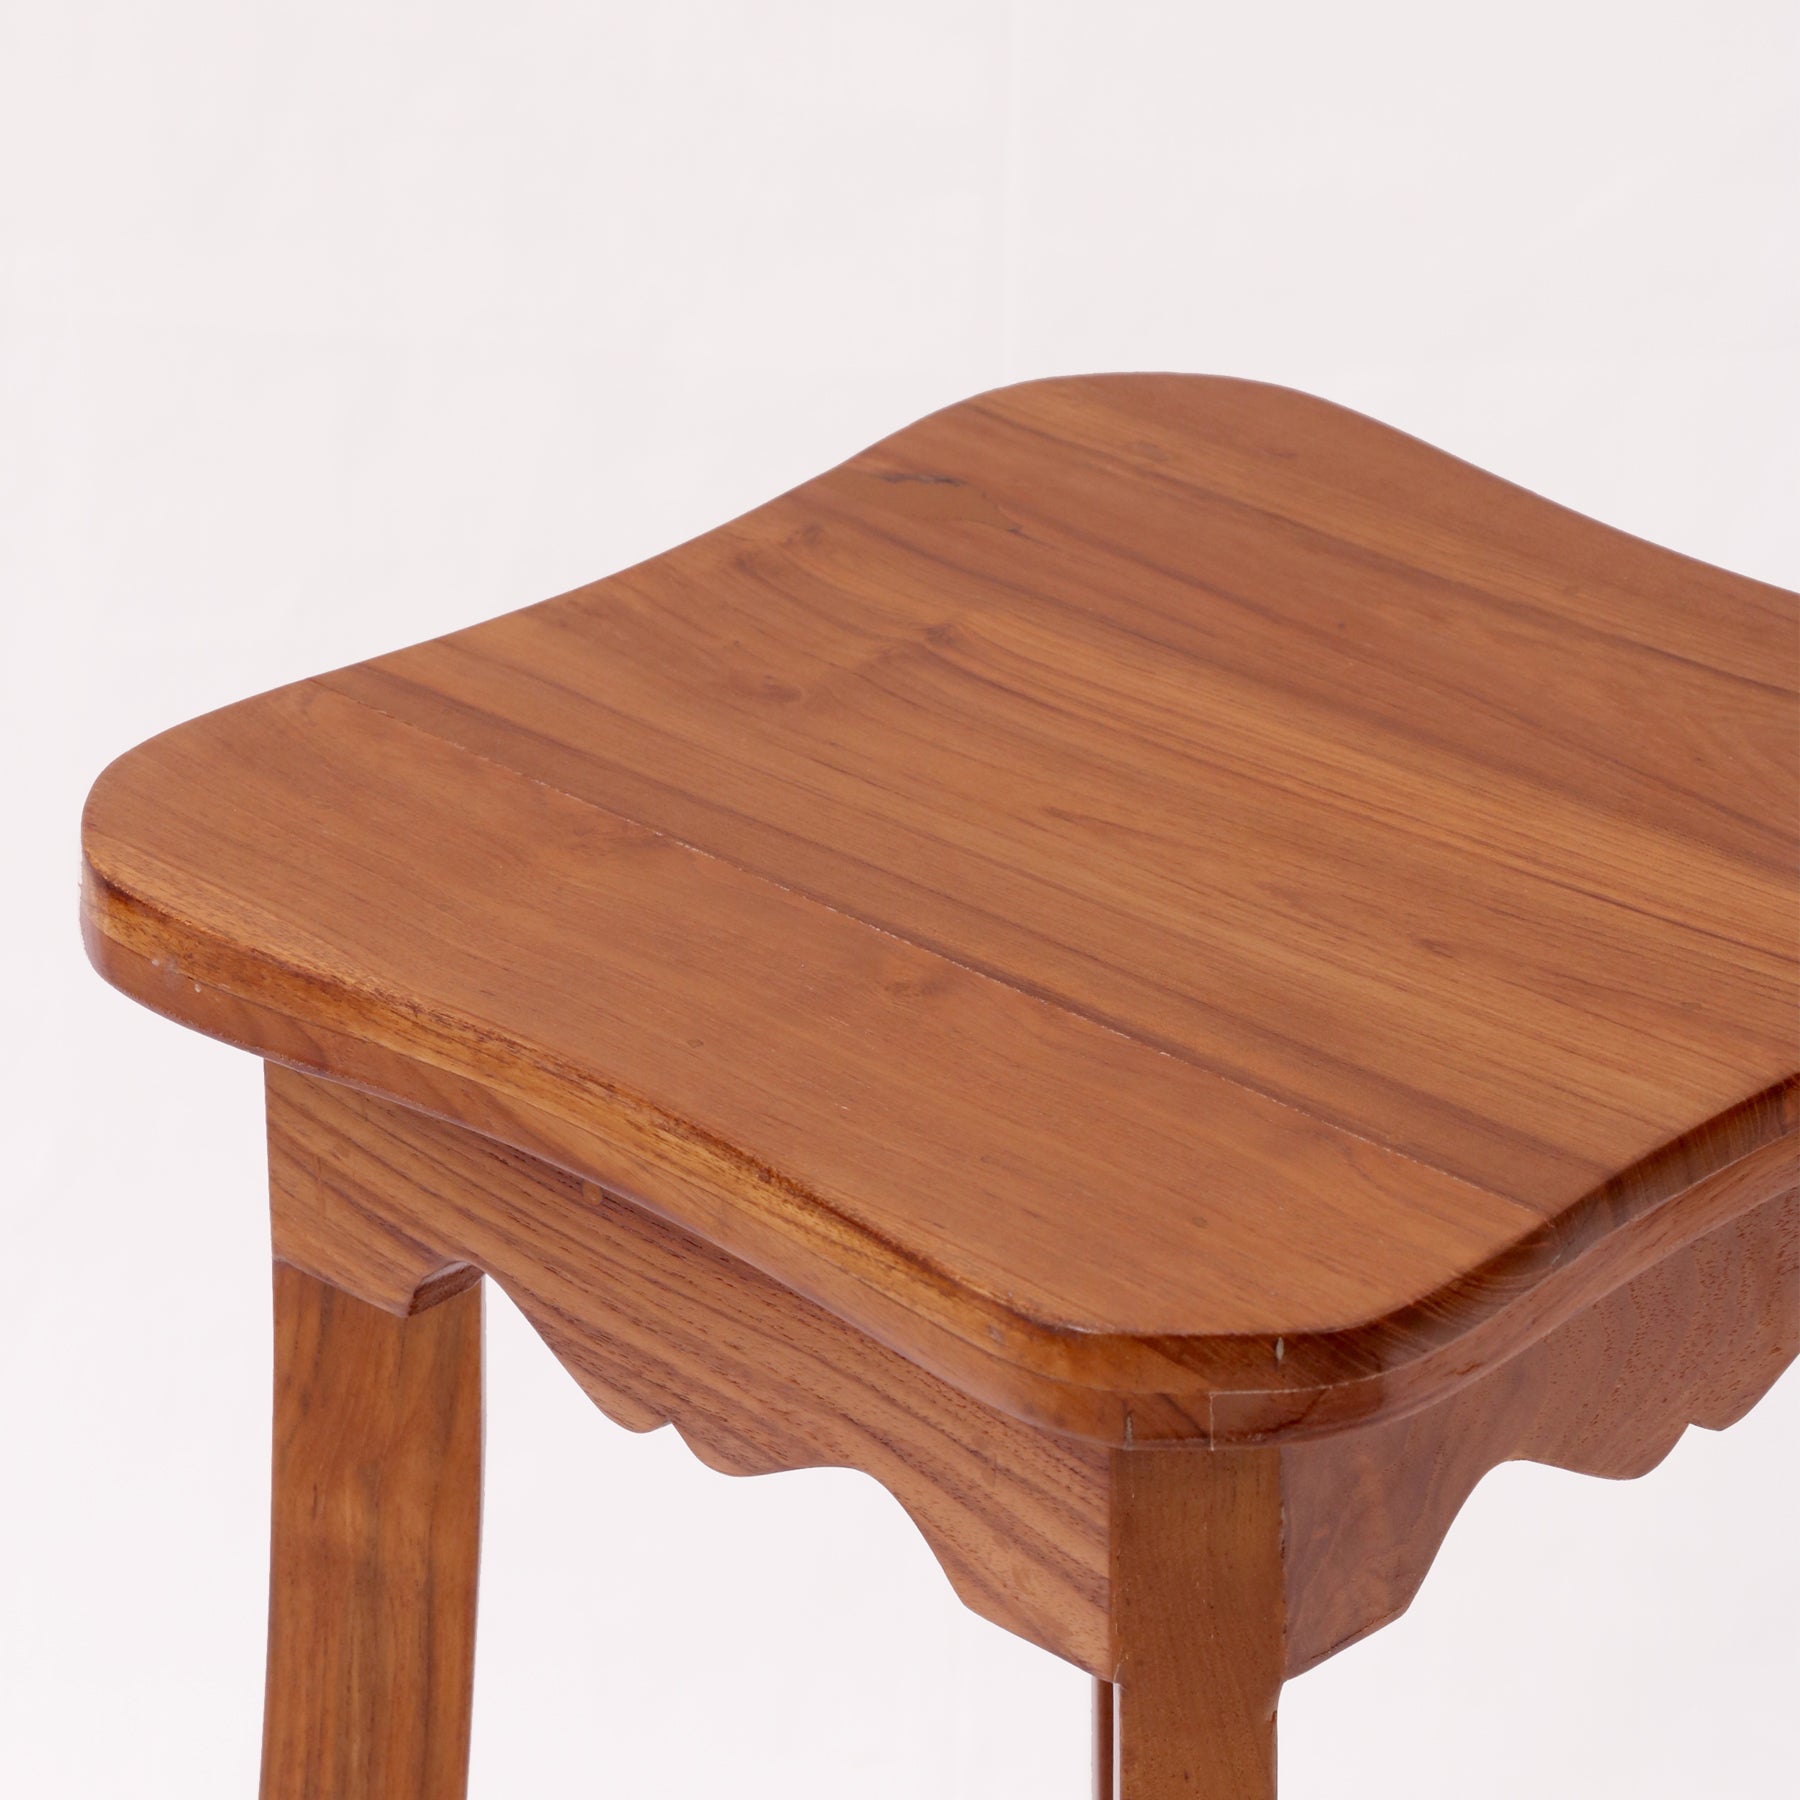 Carved and Curved Teak Stool Stool